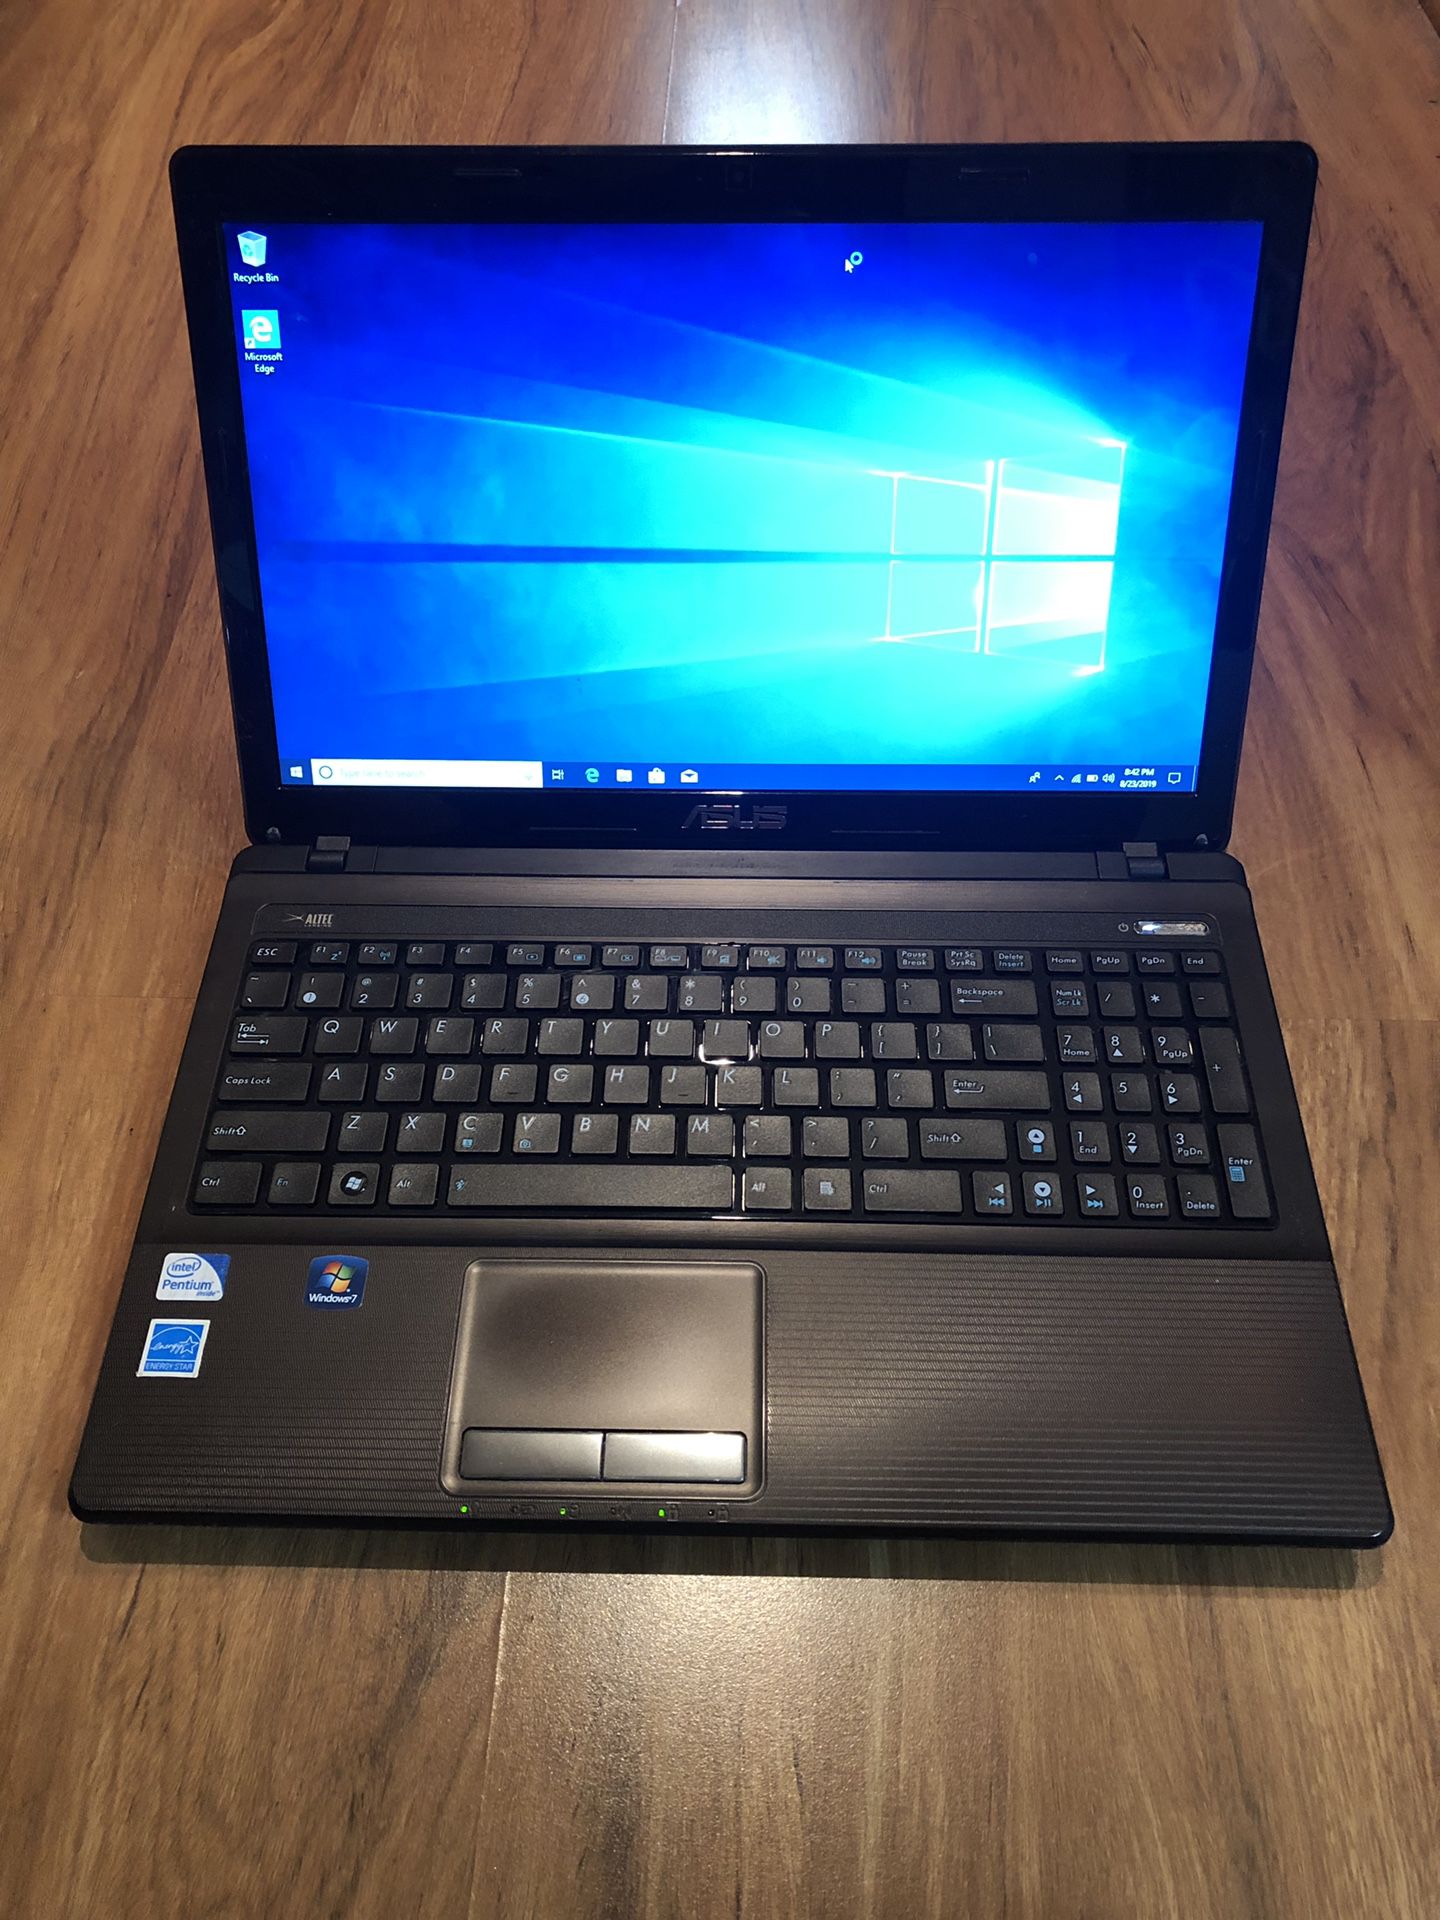 Asus K53E 4GB Ram 160GB Hard Drive 15.6 inch Windows 10 Pro Laptop with HDMI output & charger in Excellent Working condition!!!!!!!!